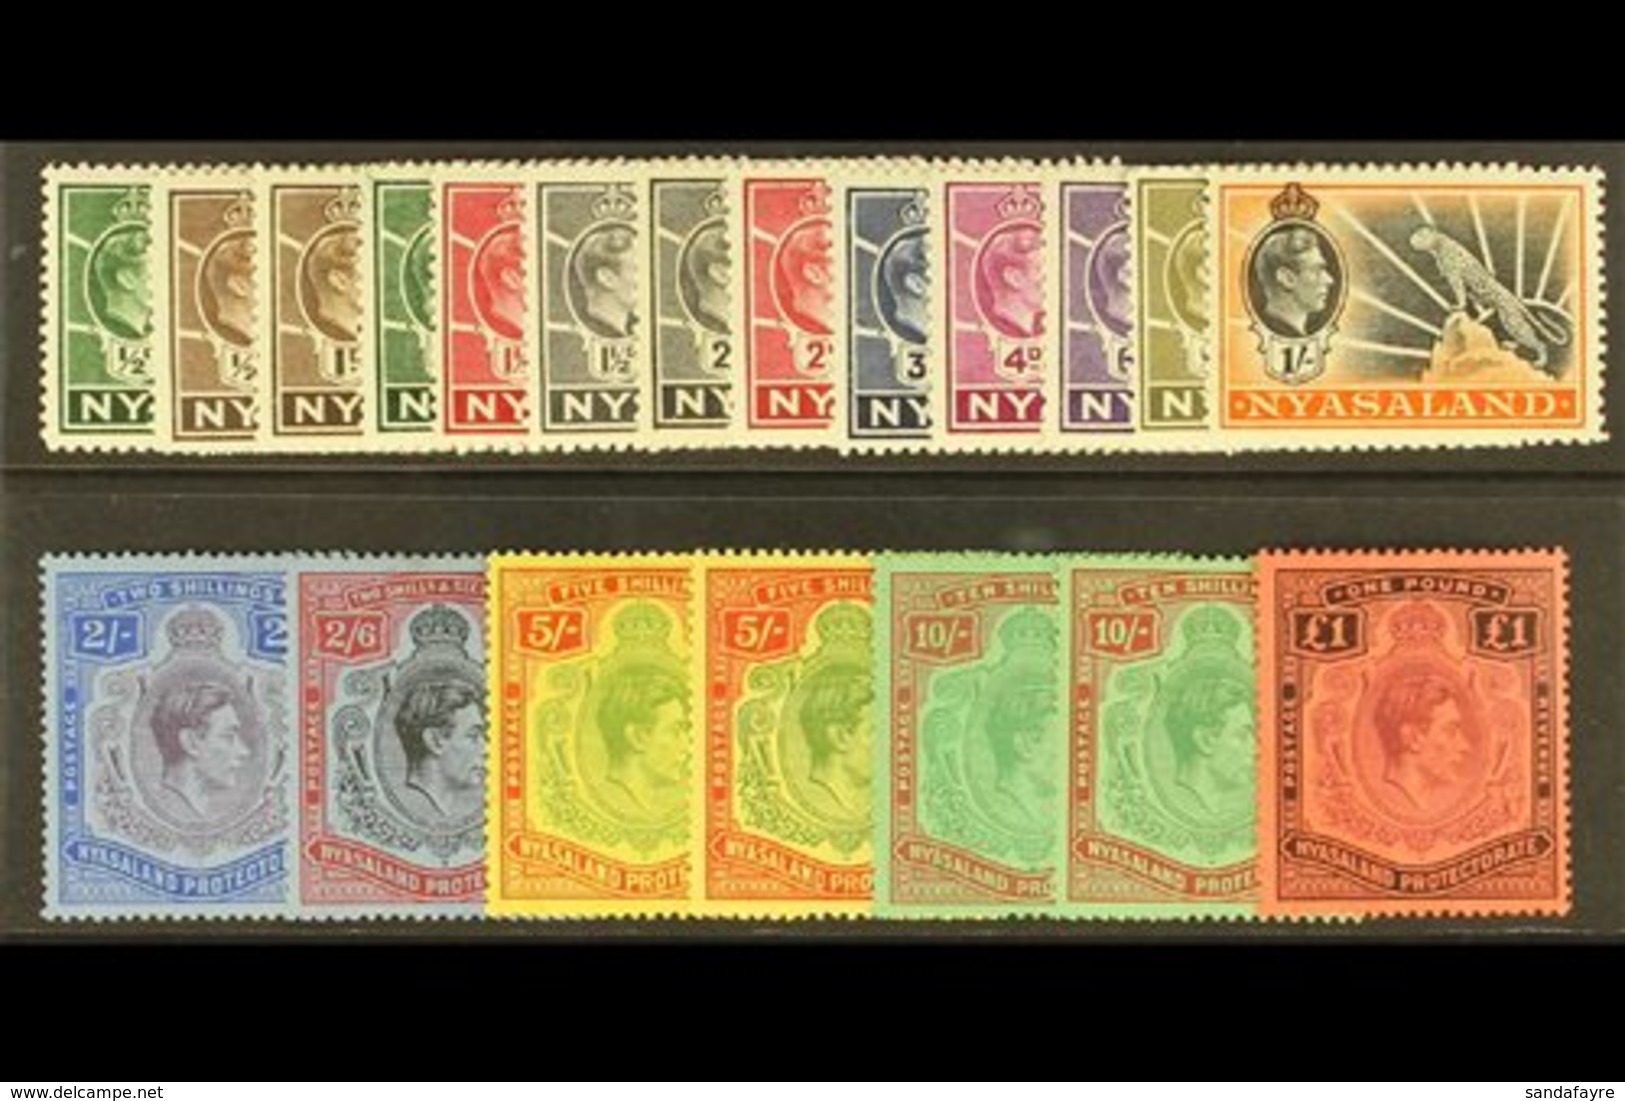 1938 Geo VI Set To £1 Complete Including Additional 5s And 10s On Ordinary Paper, SG 130/43, 141a, 142a, Very Fine Mint. - Nyassaland (1907-1953)